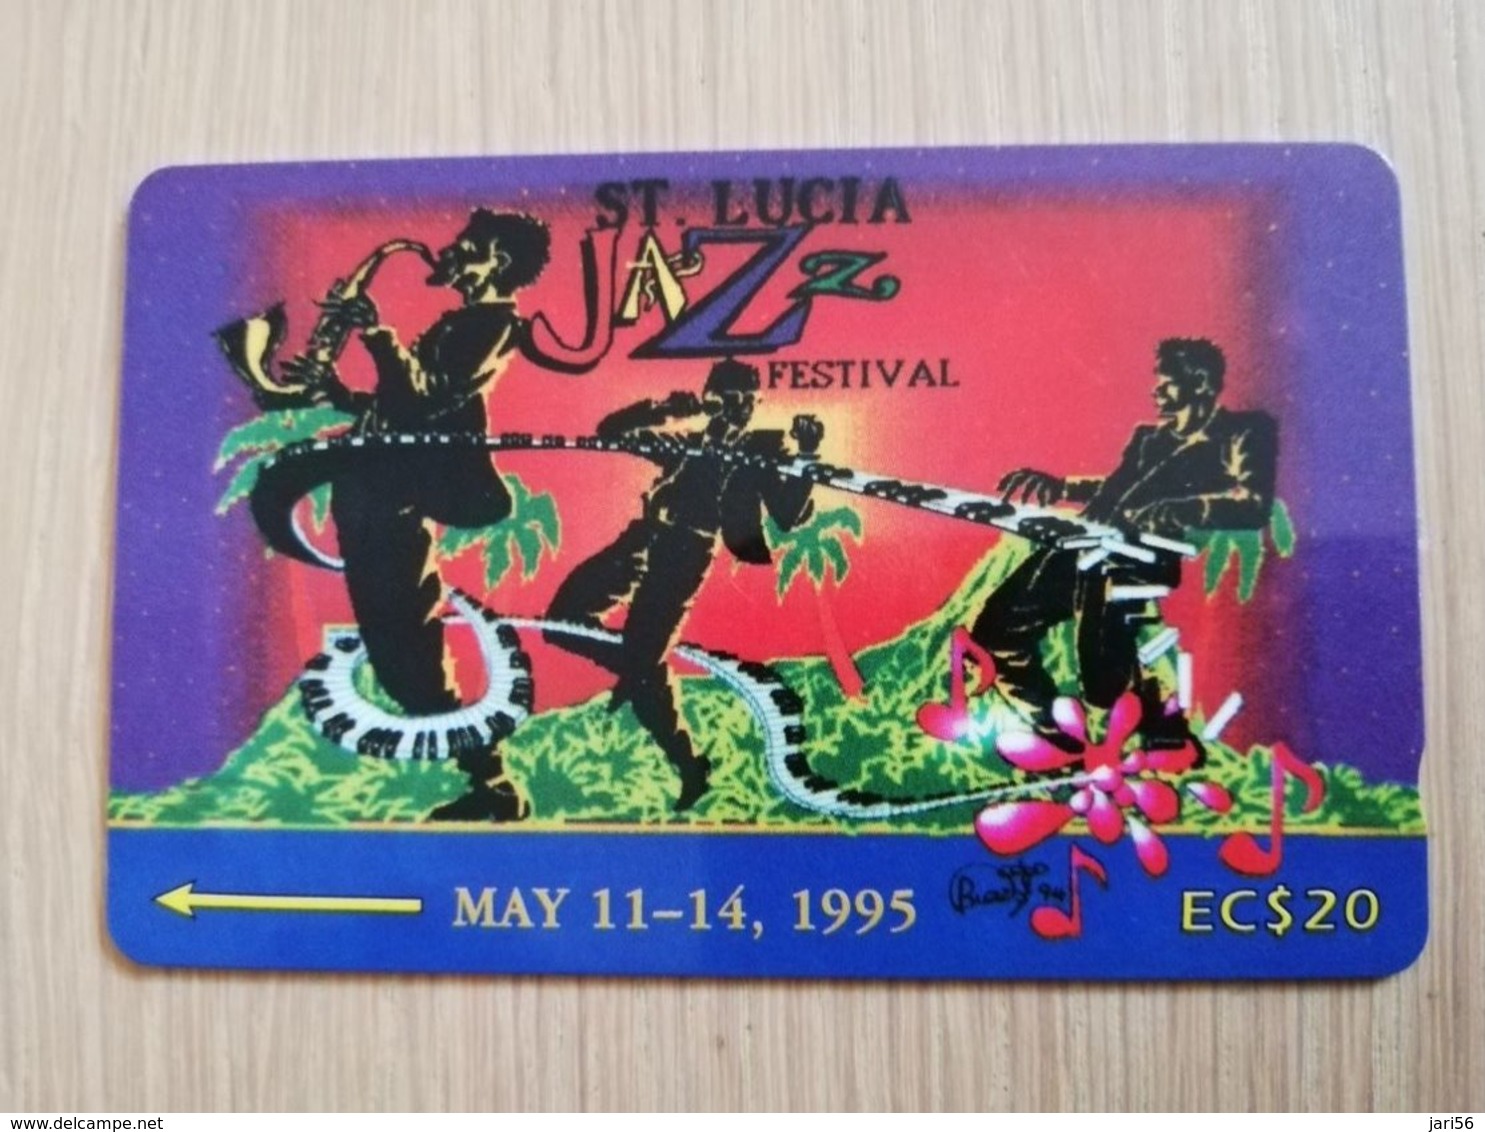 ST LUCIA    $ 20   CABLE & WIRELESS  STL-19A  19CSLA      JAZZ FESTIVAL 1995  Fine Used Card ** 2419** - St. Lucia